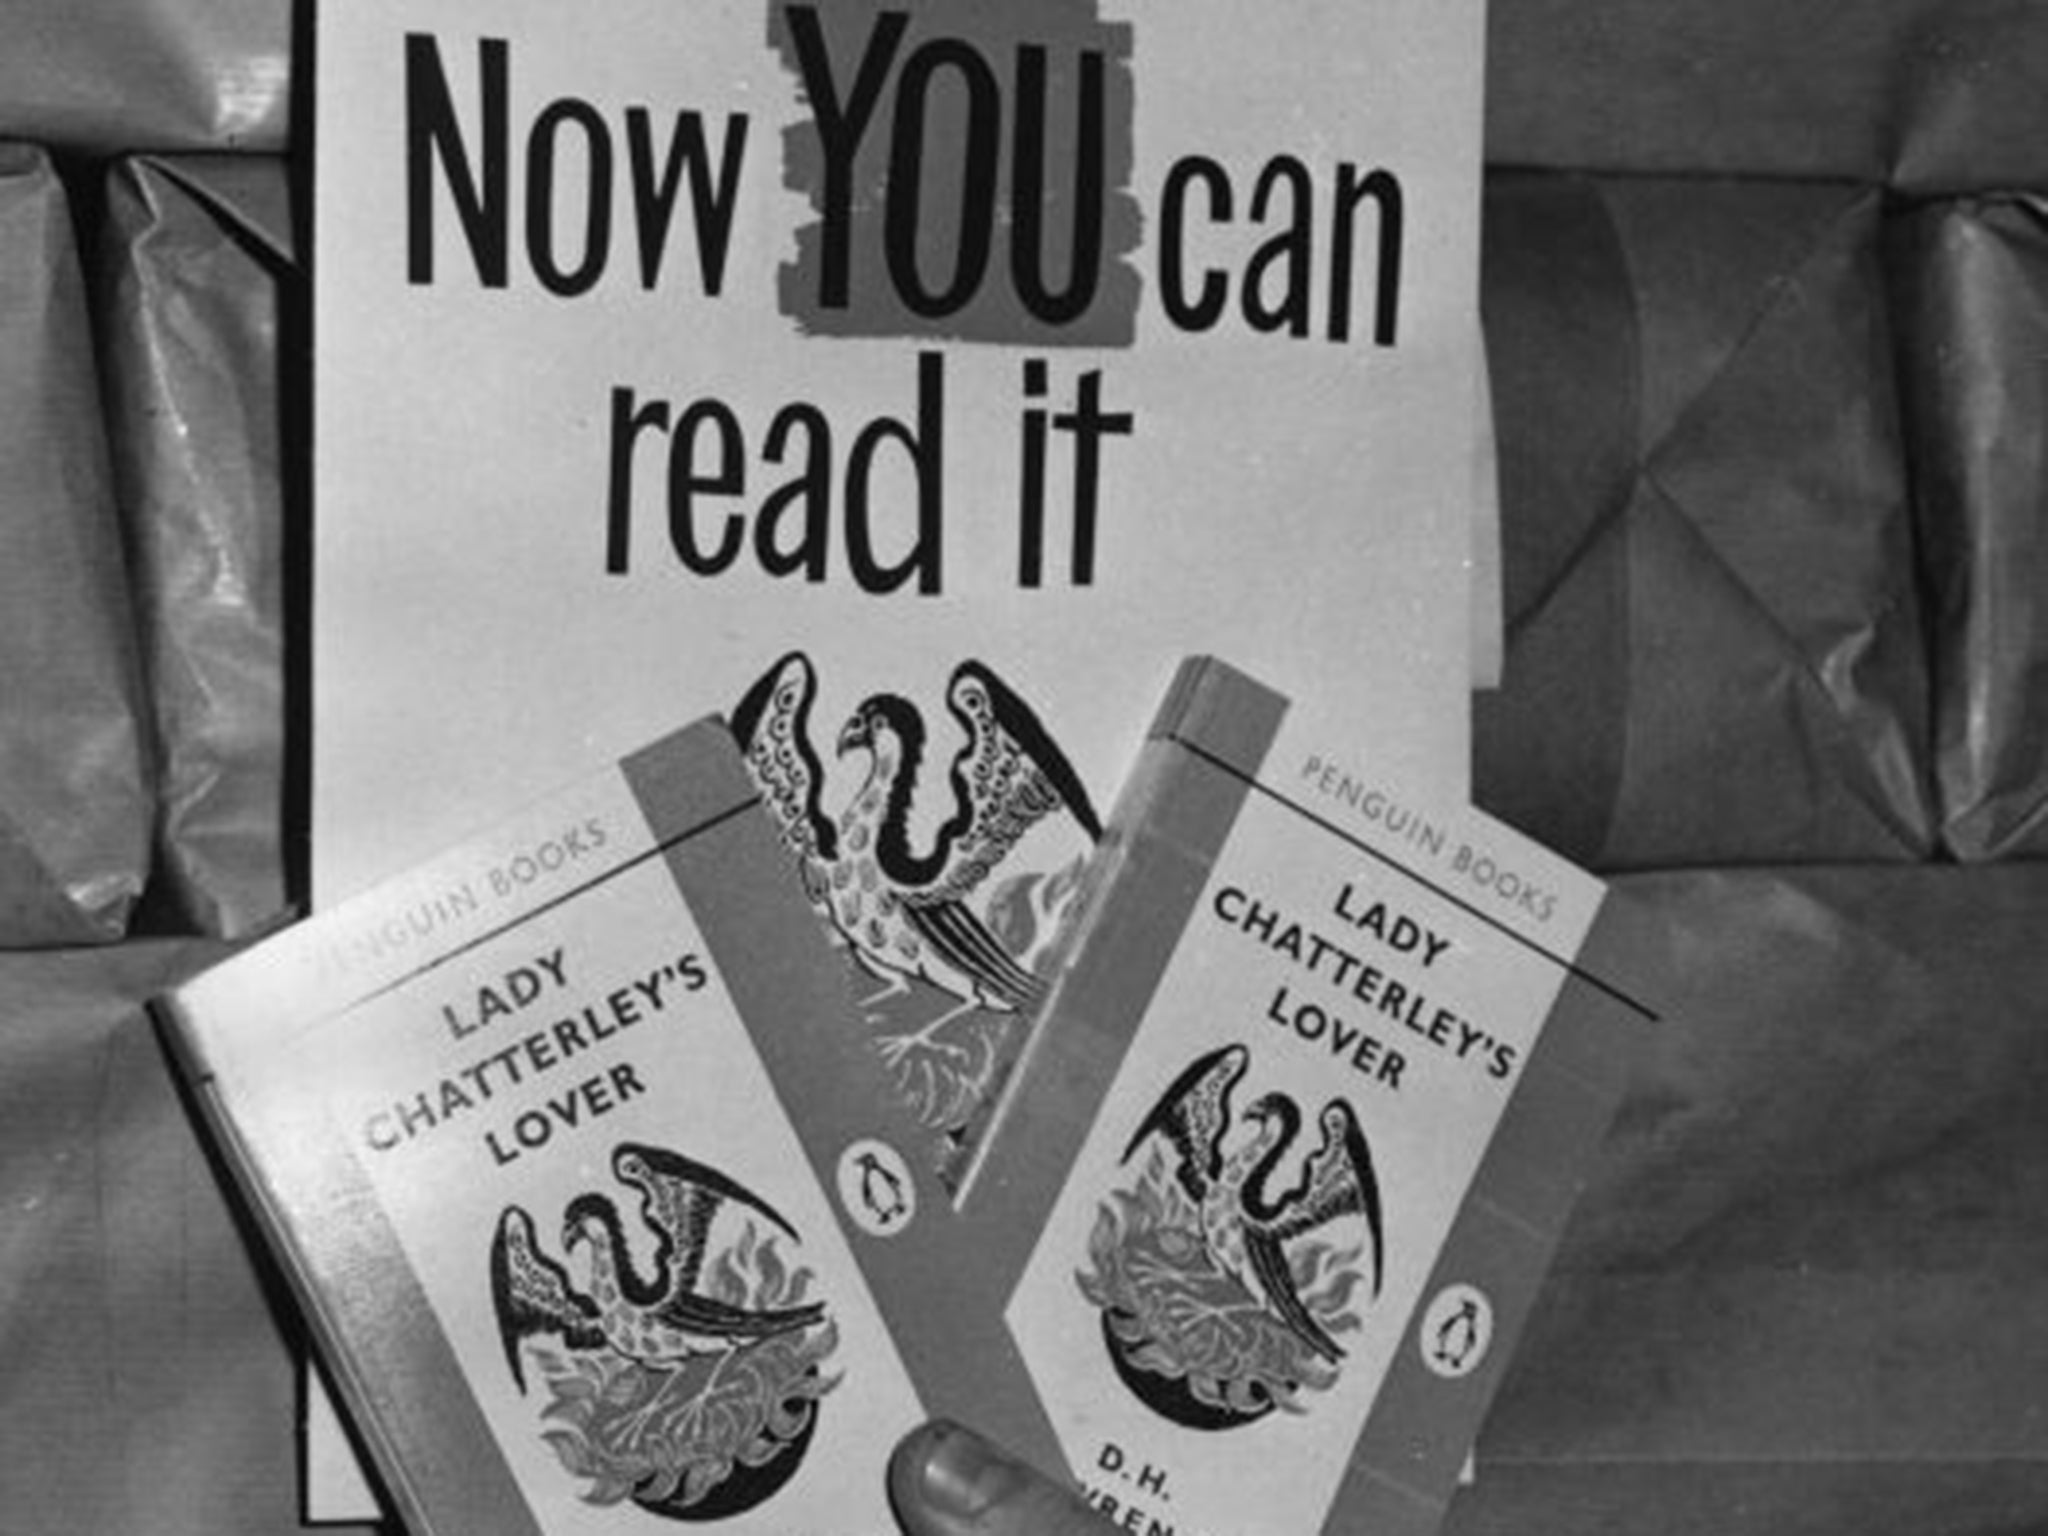 Lady Chatterley’s Lover sold 200,000-copies on its first day in 1960